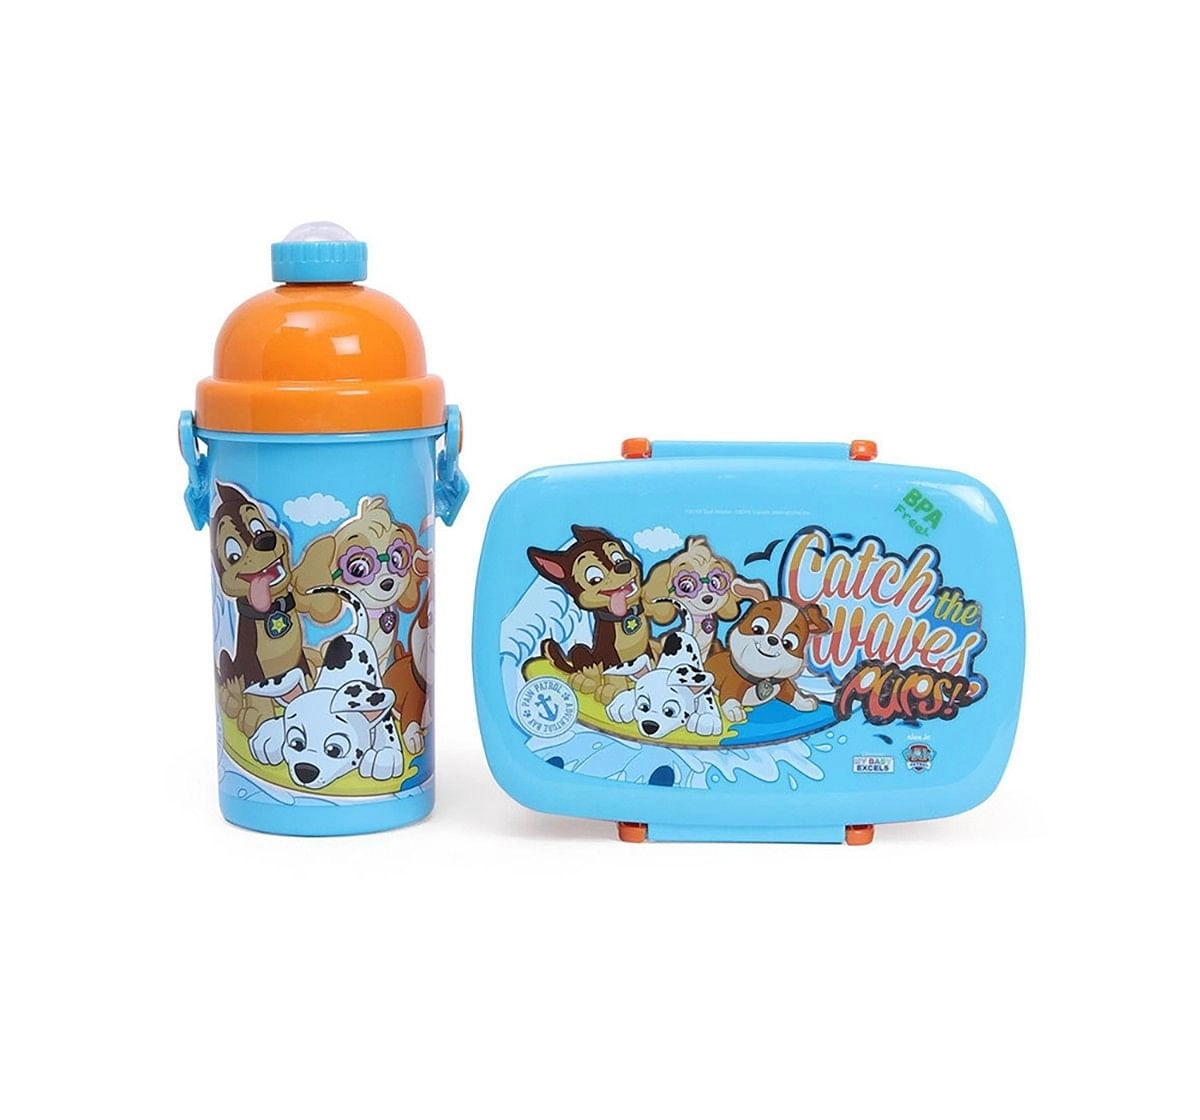 Paw Patrol Lunch Box Combo for Kids age 3Y+ 